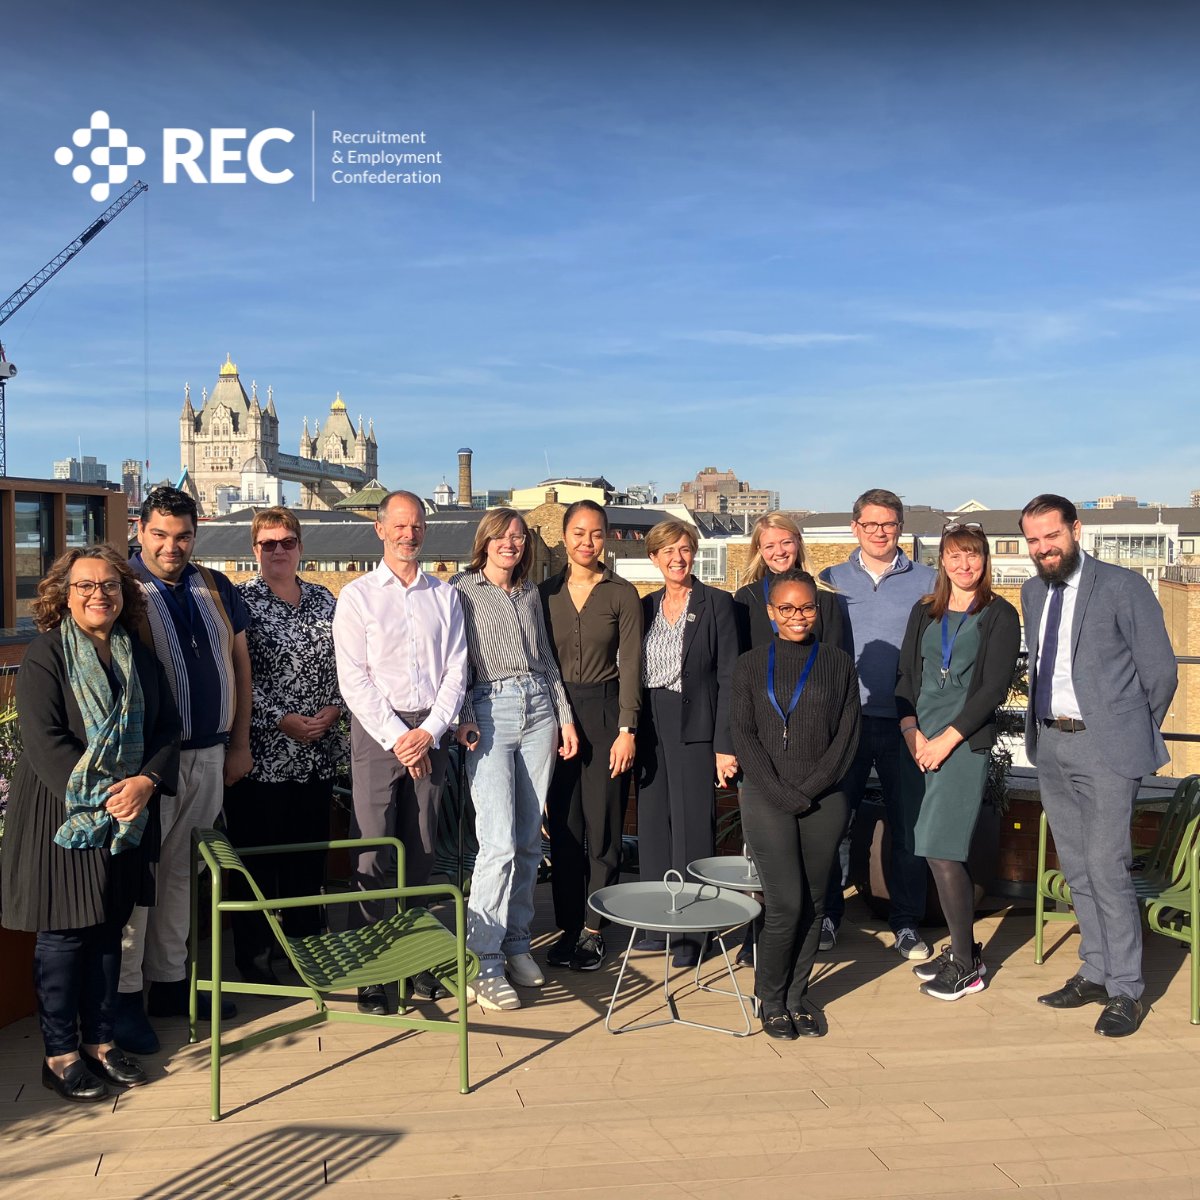 This week at the REC, we had our quarterly Employment Policy Committee meeting, where our dedicated members and campaign colleagues discussed the latest regulatory and policy updates as well as campaign priorities, ensuring our work aligns with members' needs.#ManifestoForChange